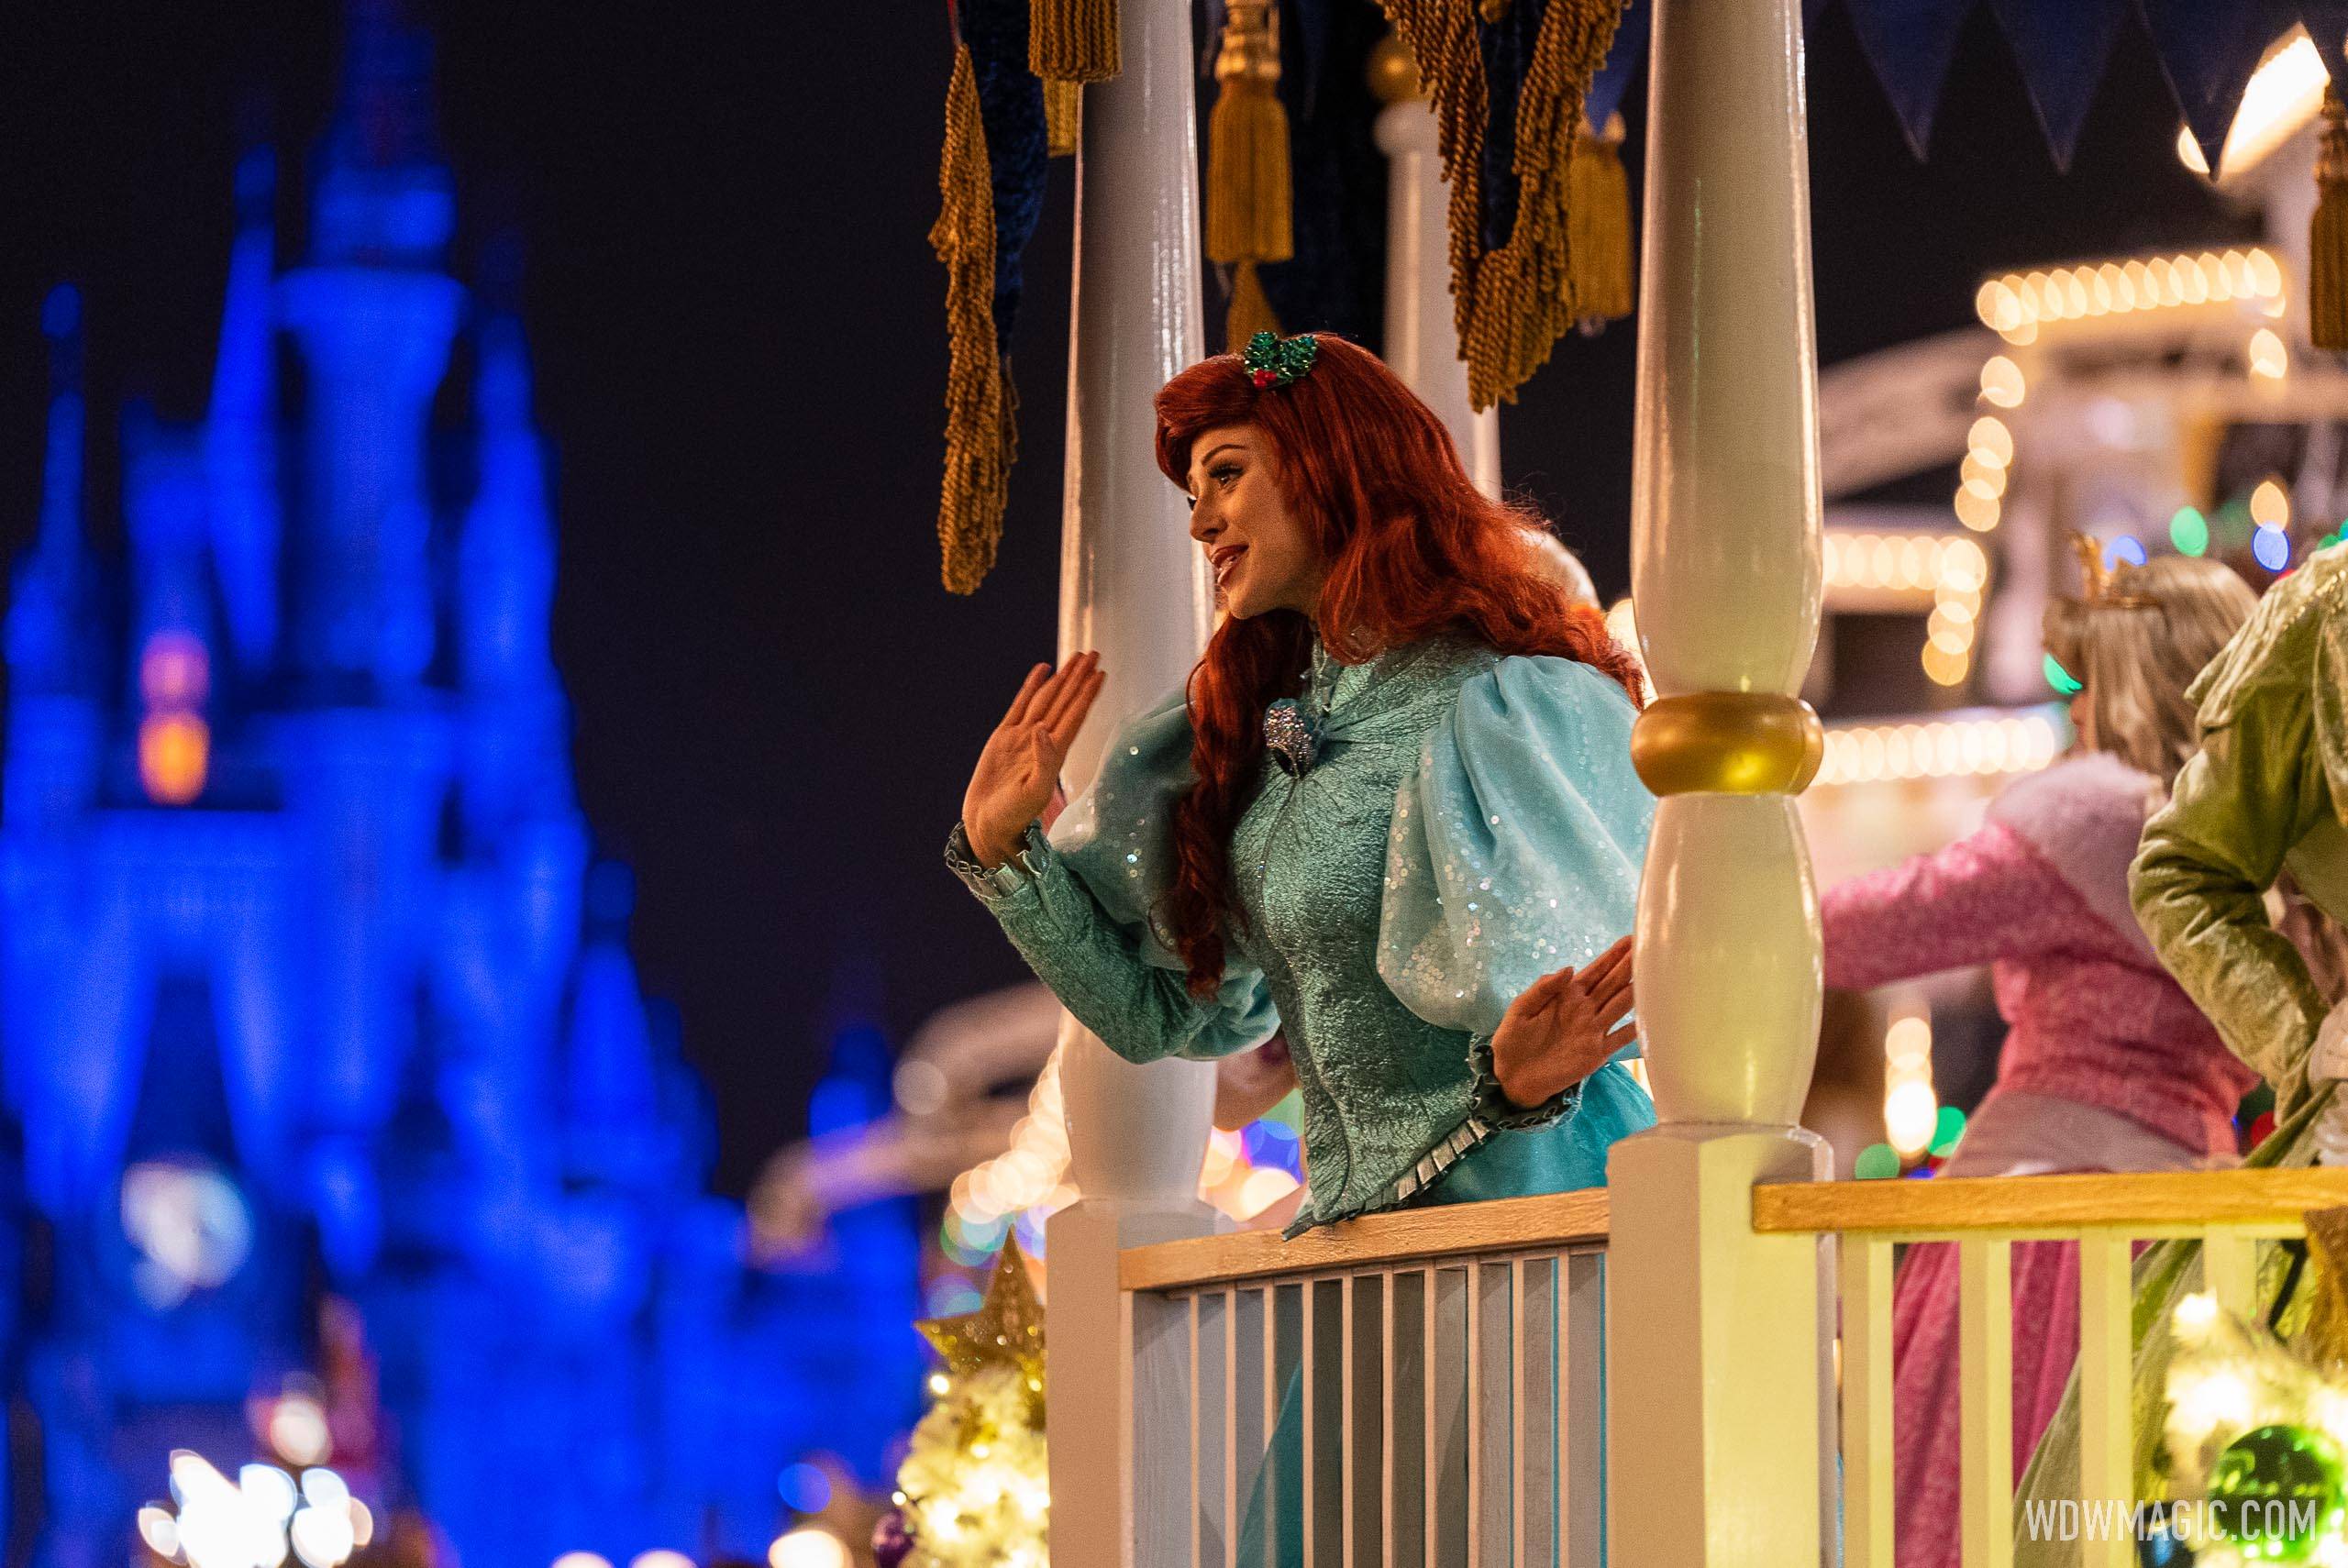 'Mickey's Once Upon a Christmastime Parade' will perform twice each day during the peak Christmas week at Walt Disney World